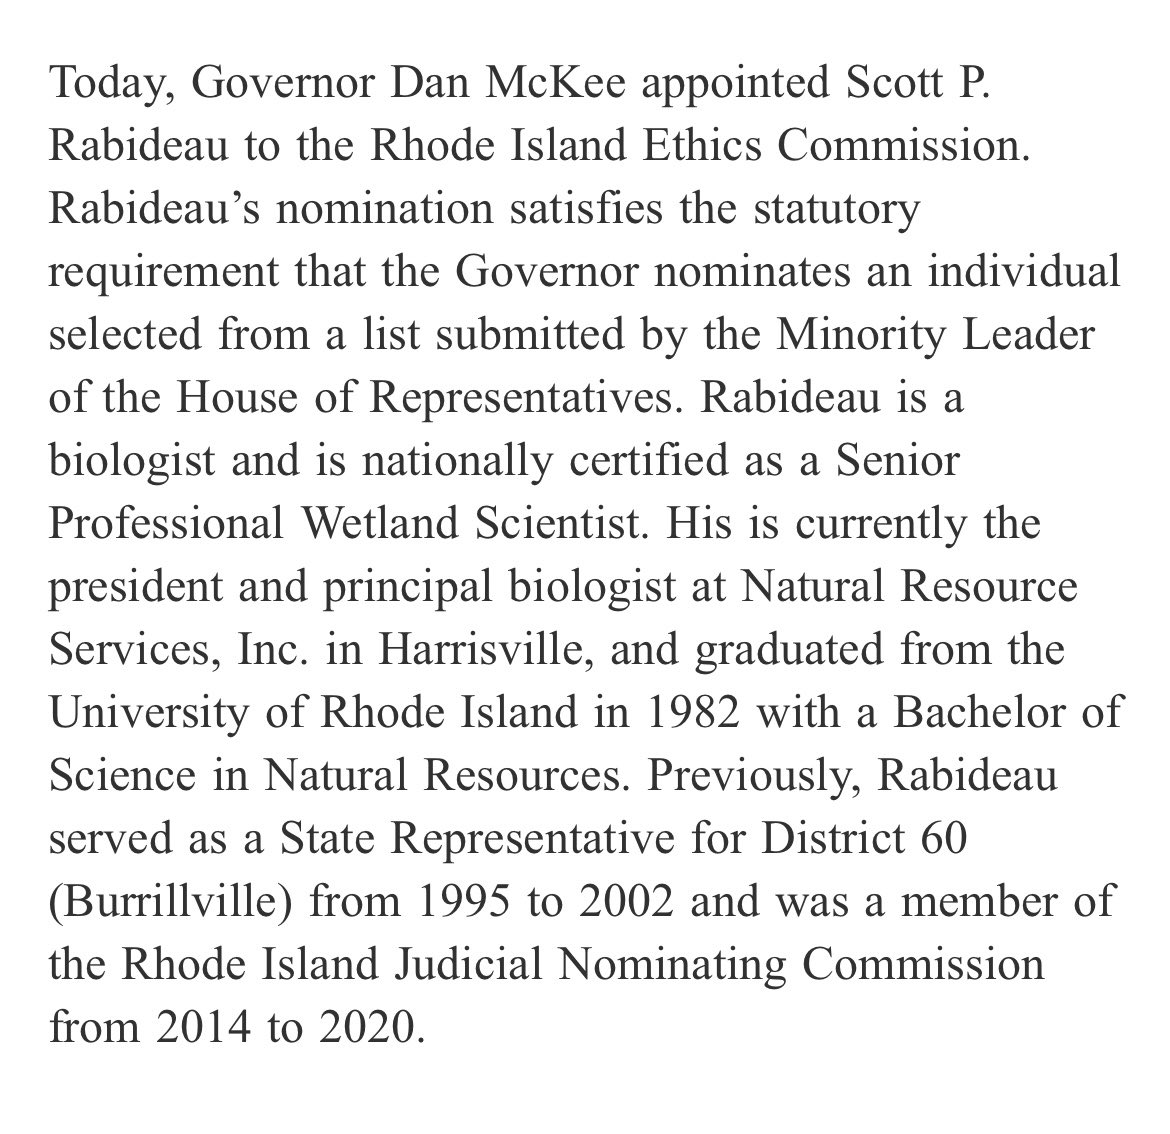 Former GOP rep appointed by ⁦@GovDanMcKee⁩ to the Ethics Commission